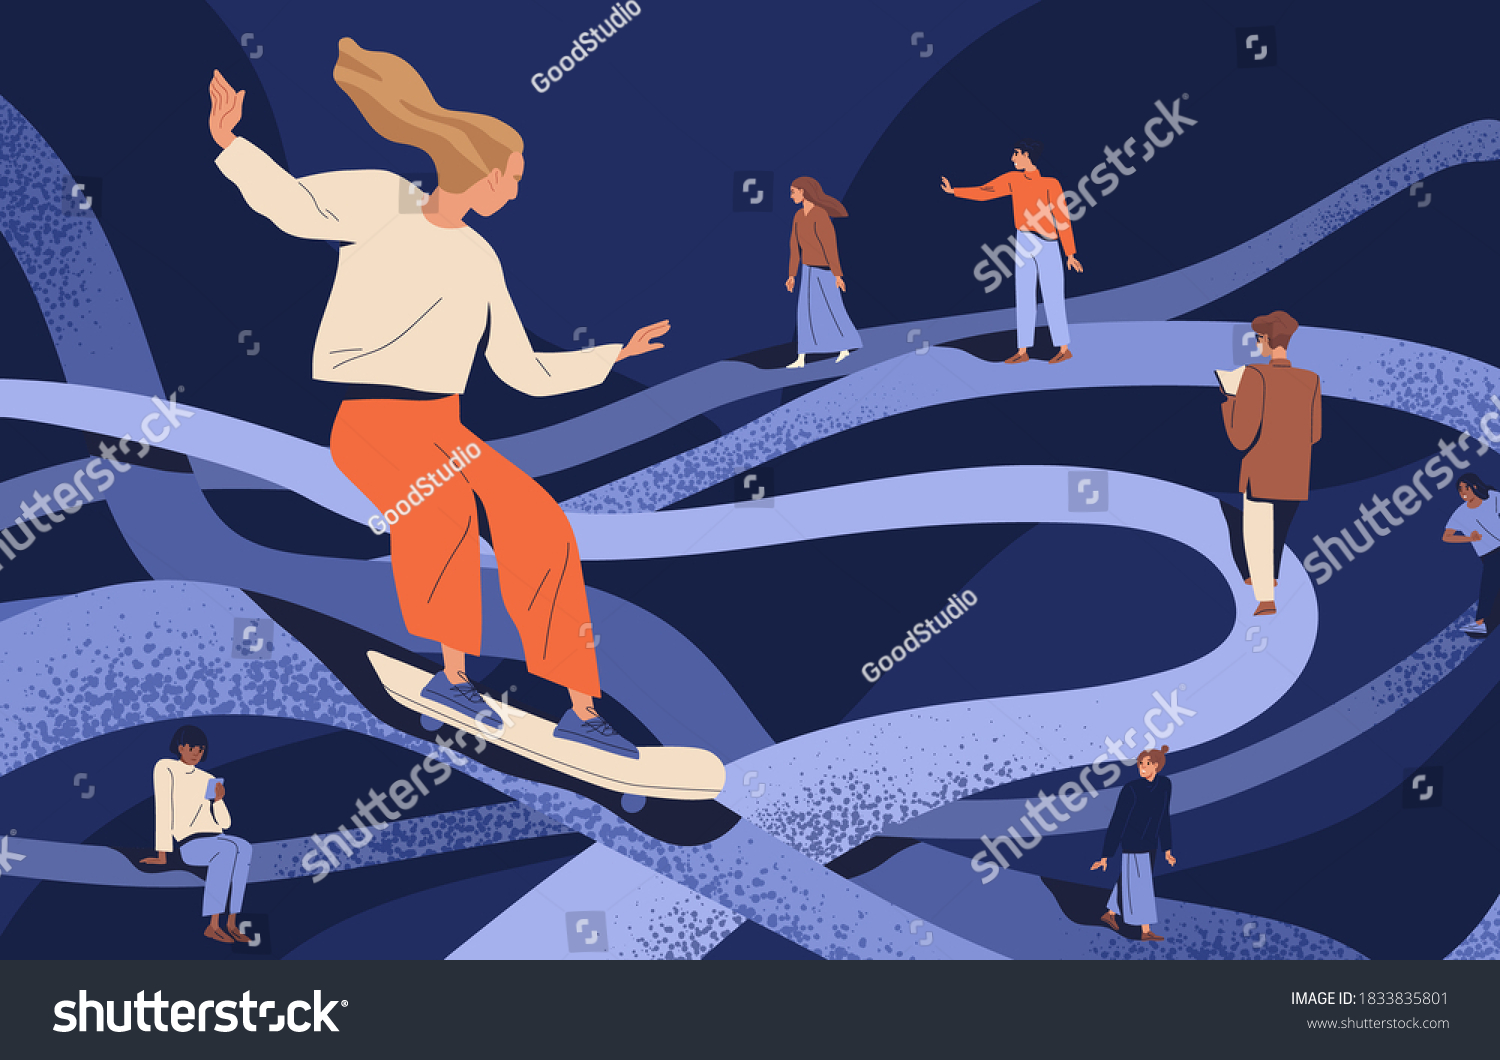 SVG of Psychological concept of important key points in memory or searching and finding life path. People going in past by psychotherapy. Flat vector cartoon illustration of people at tangled ways svg